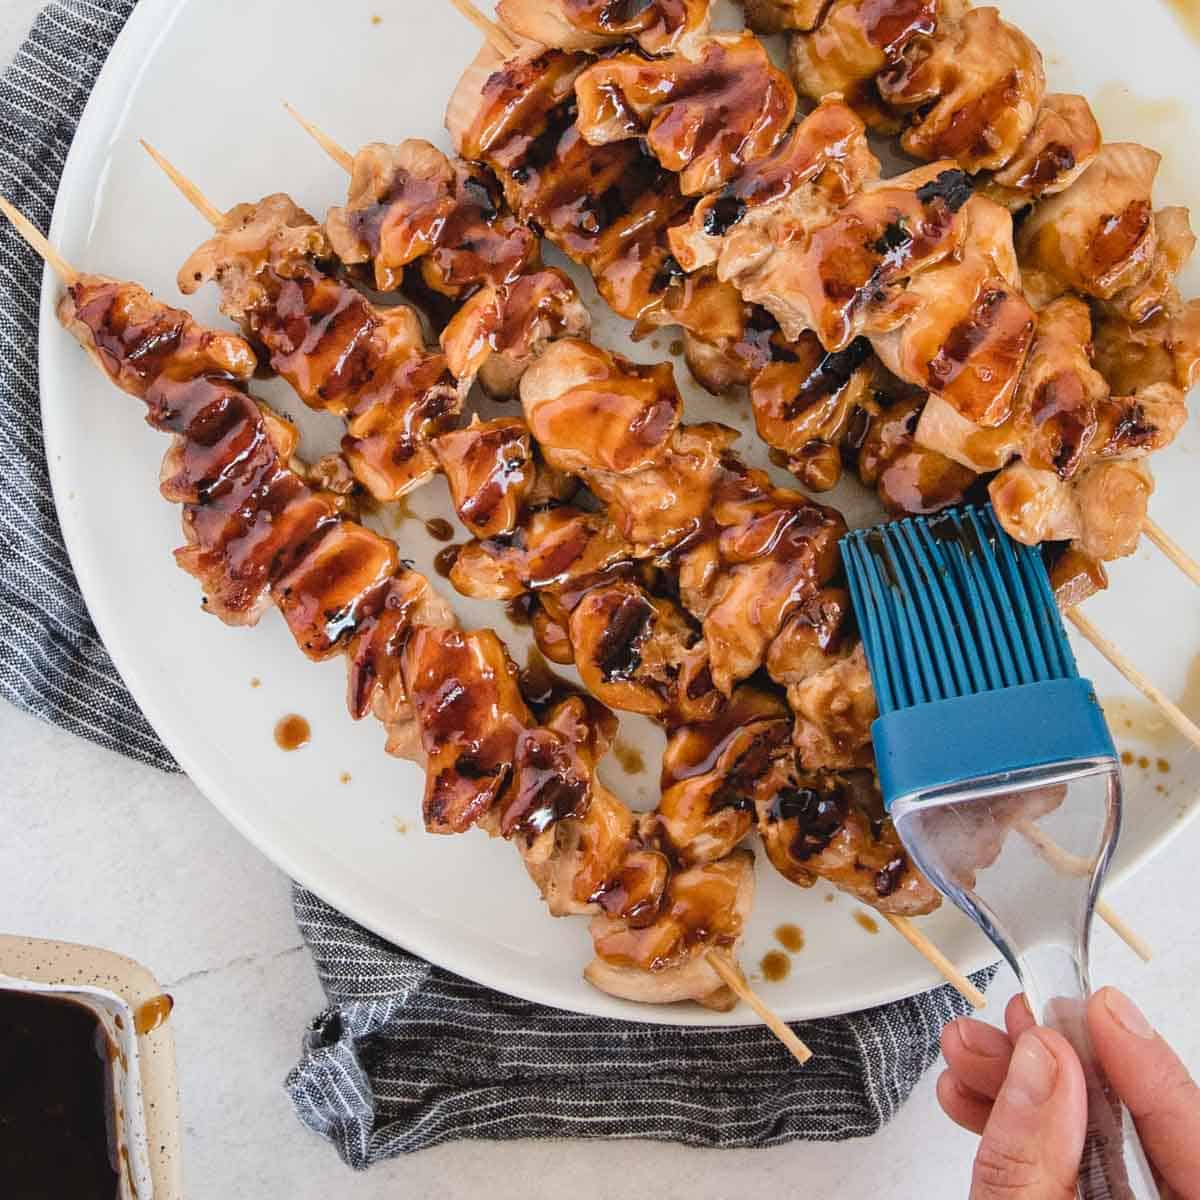 Grill brush spreading sauce onto chicken skewers